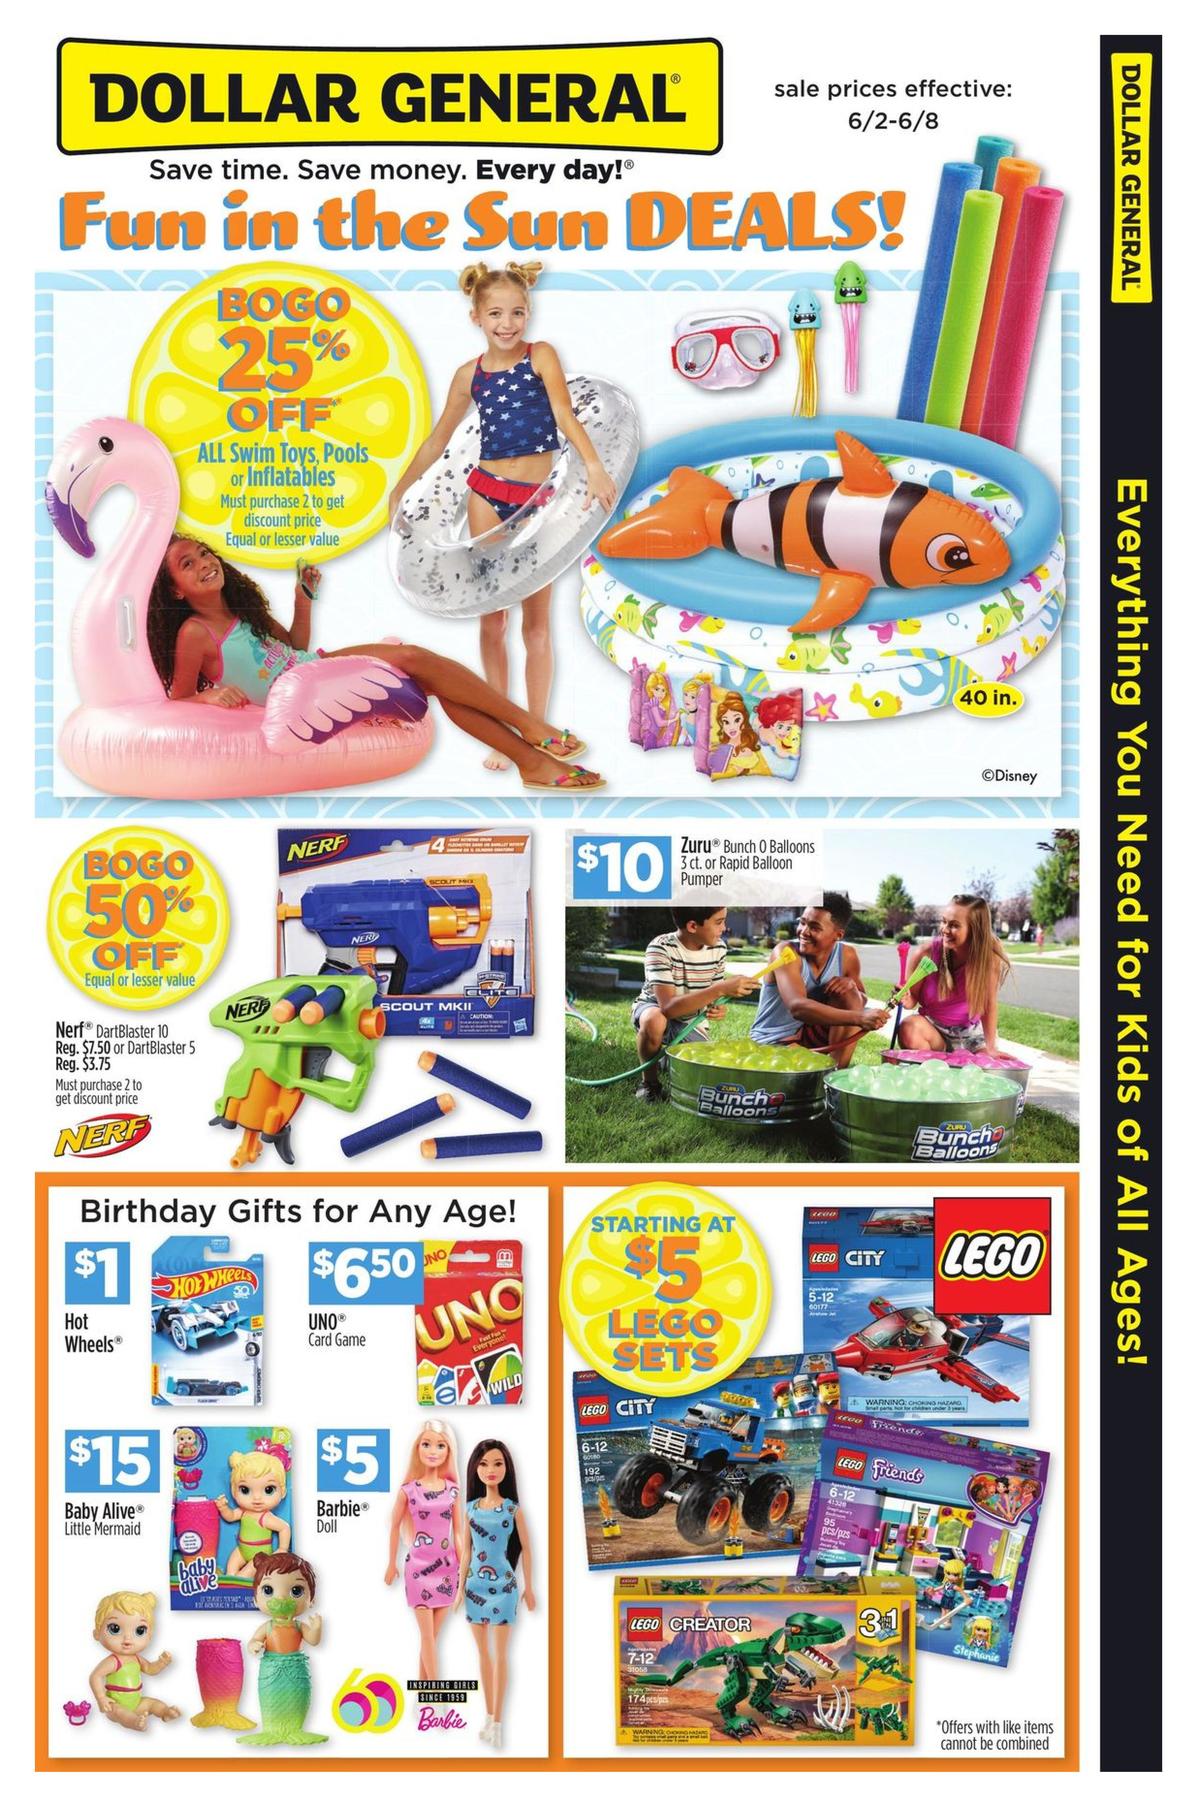 Dollar General Save Big for Your Little Ones! Weekly Ad from June 2